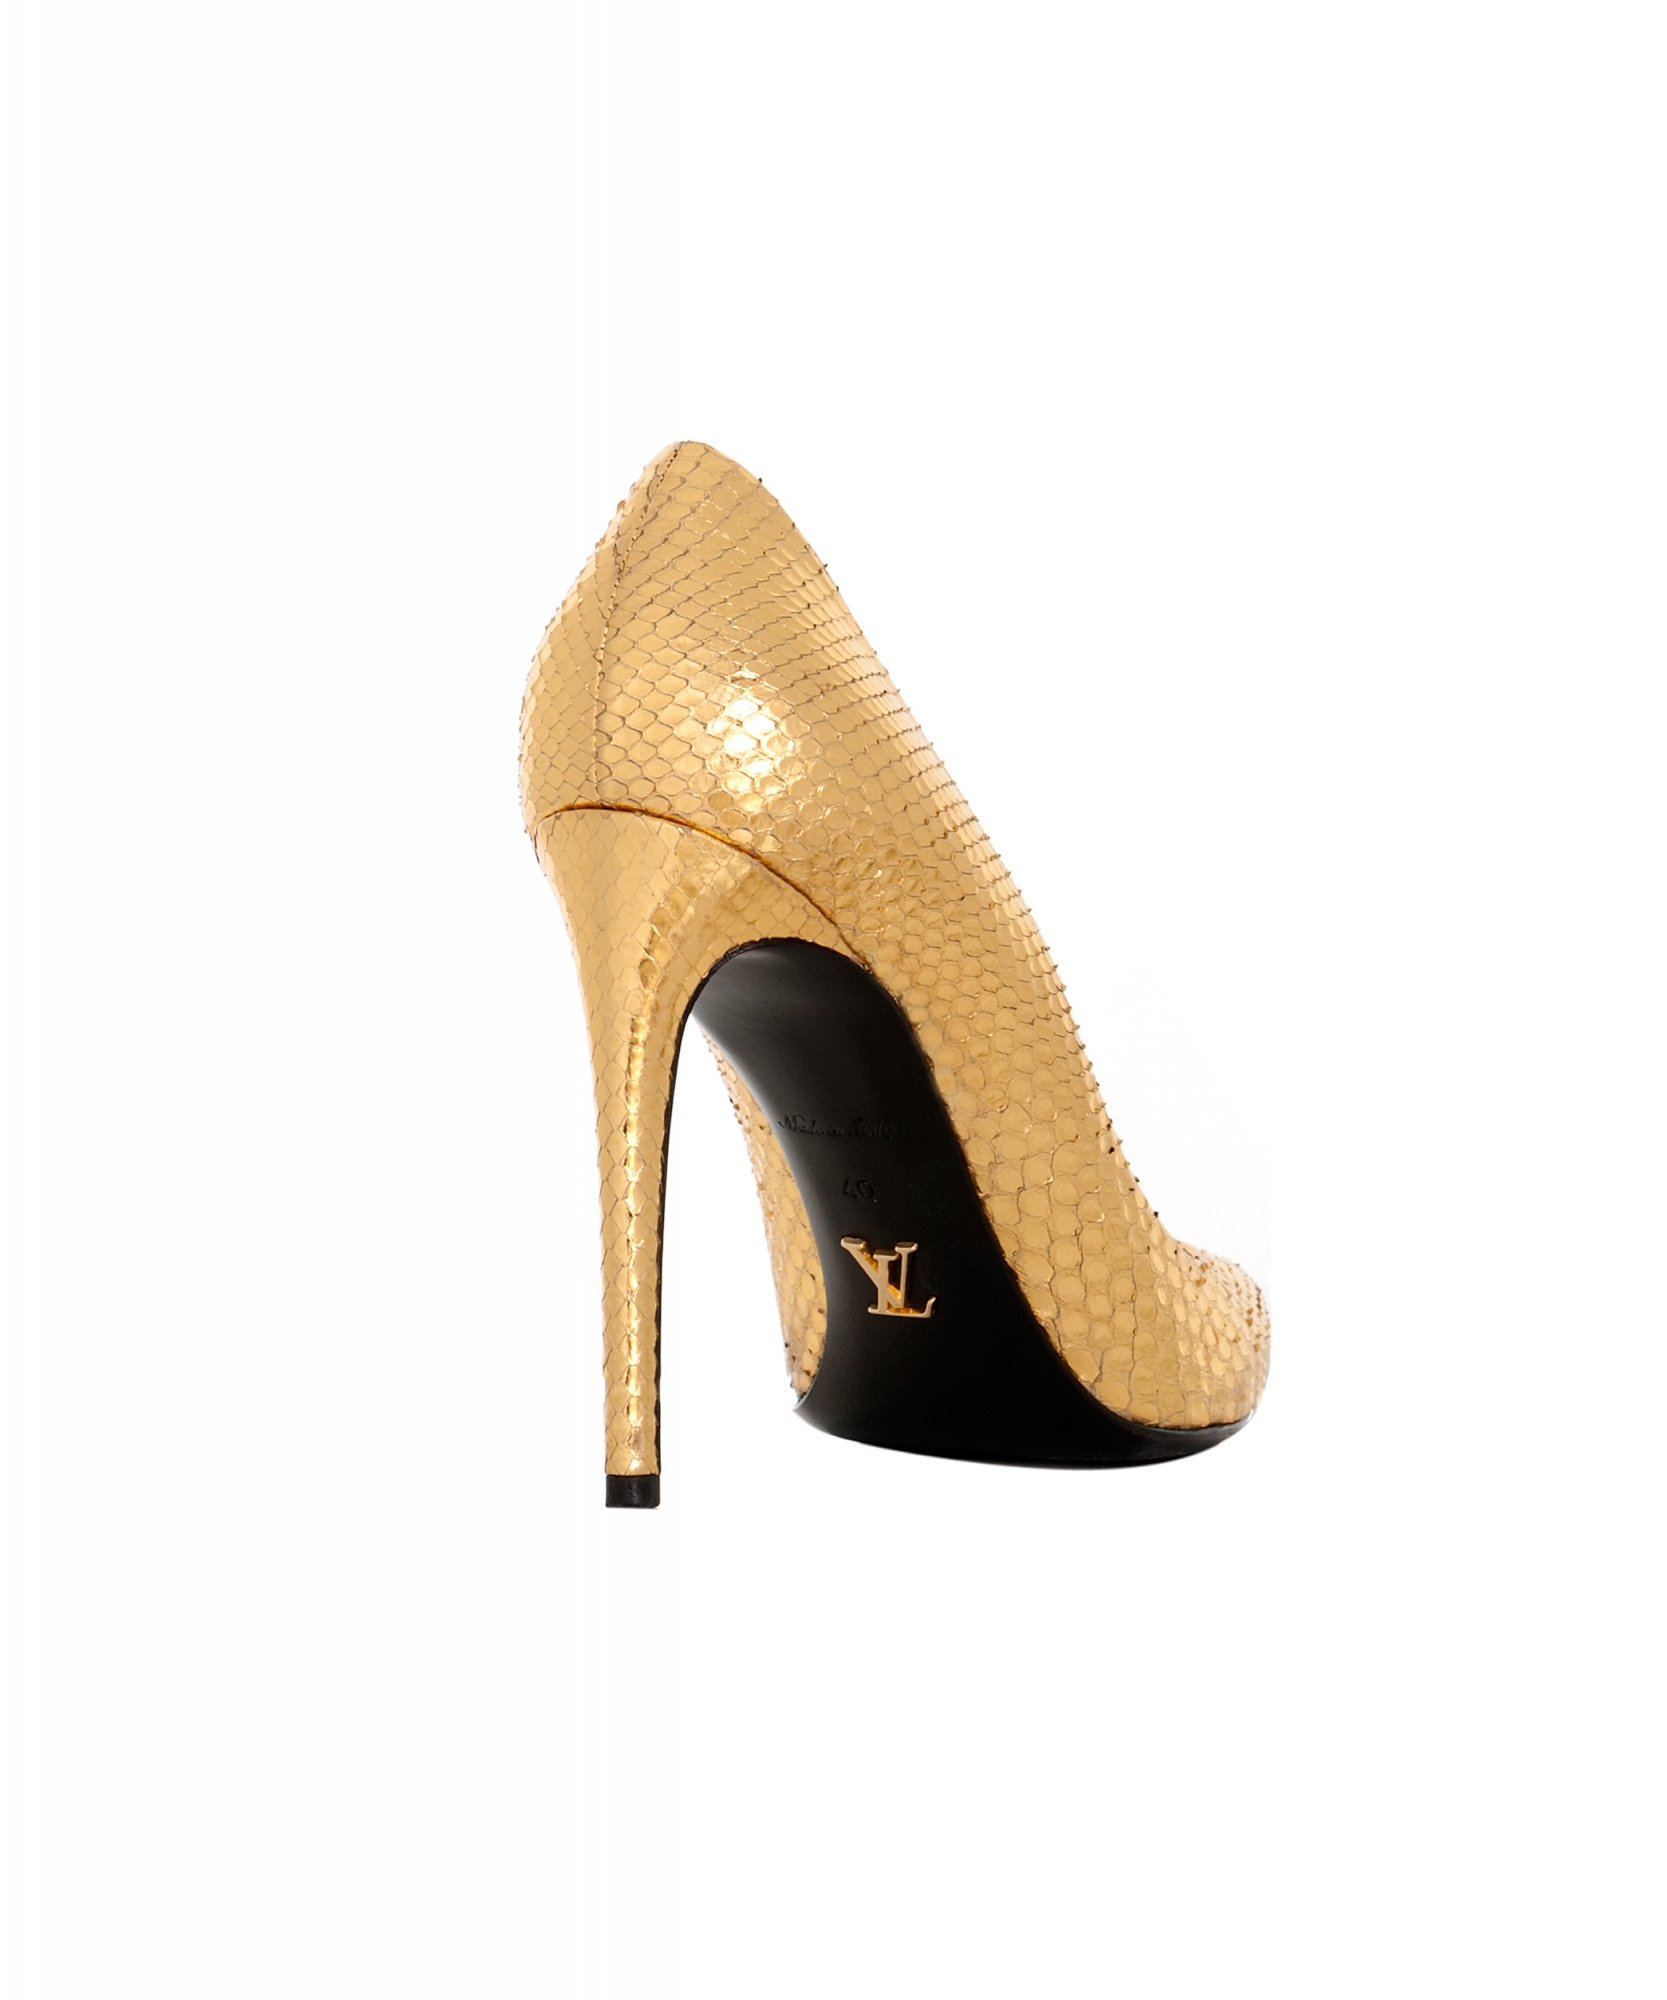 Leather heels Louis Vuitton Gold size 38.5 EU in Leather - 31445499